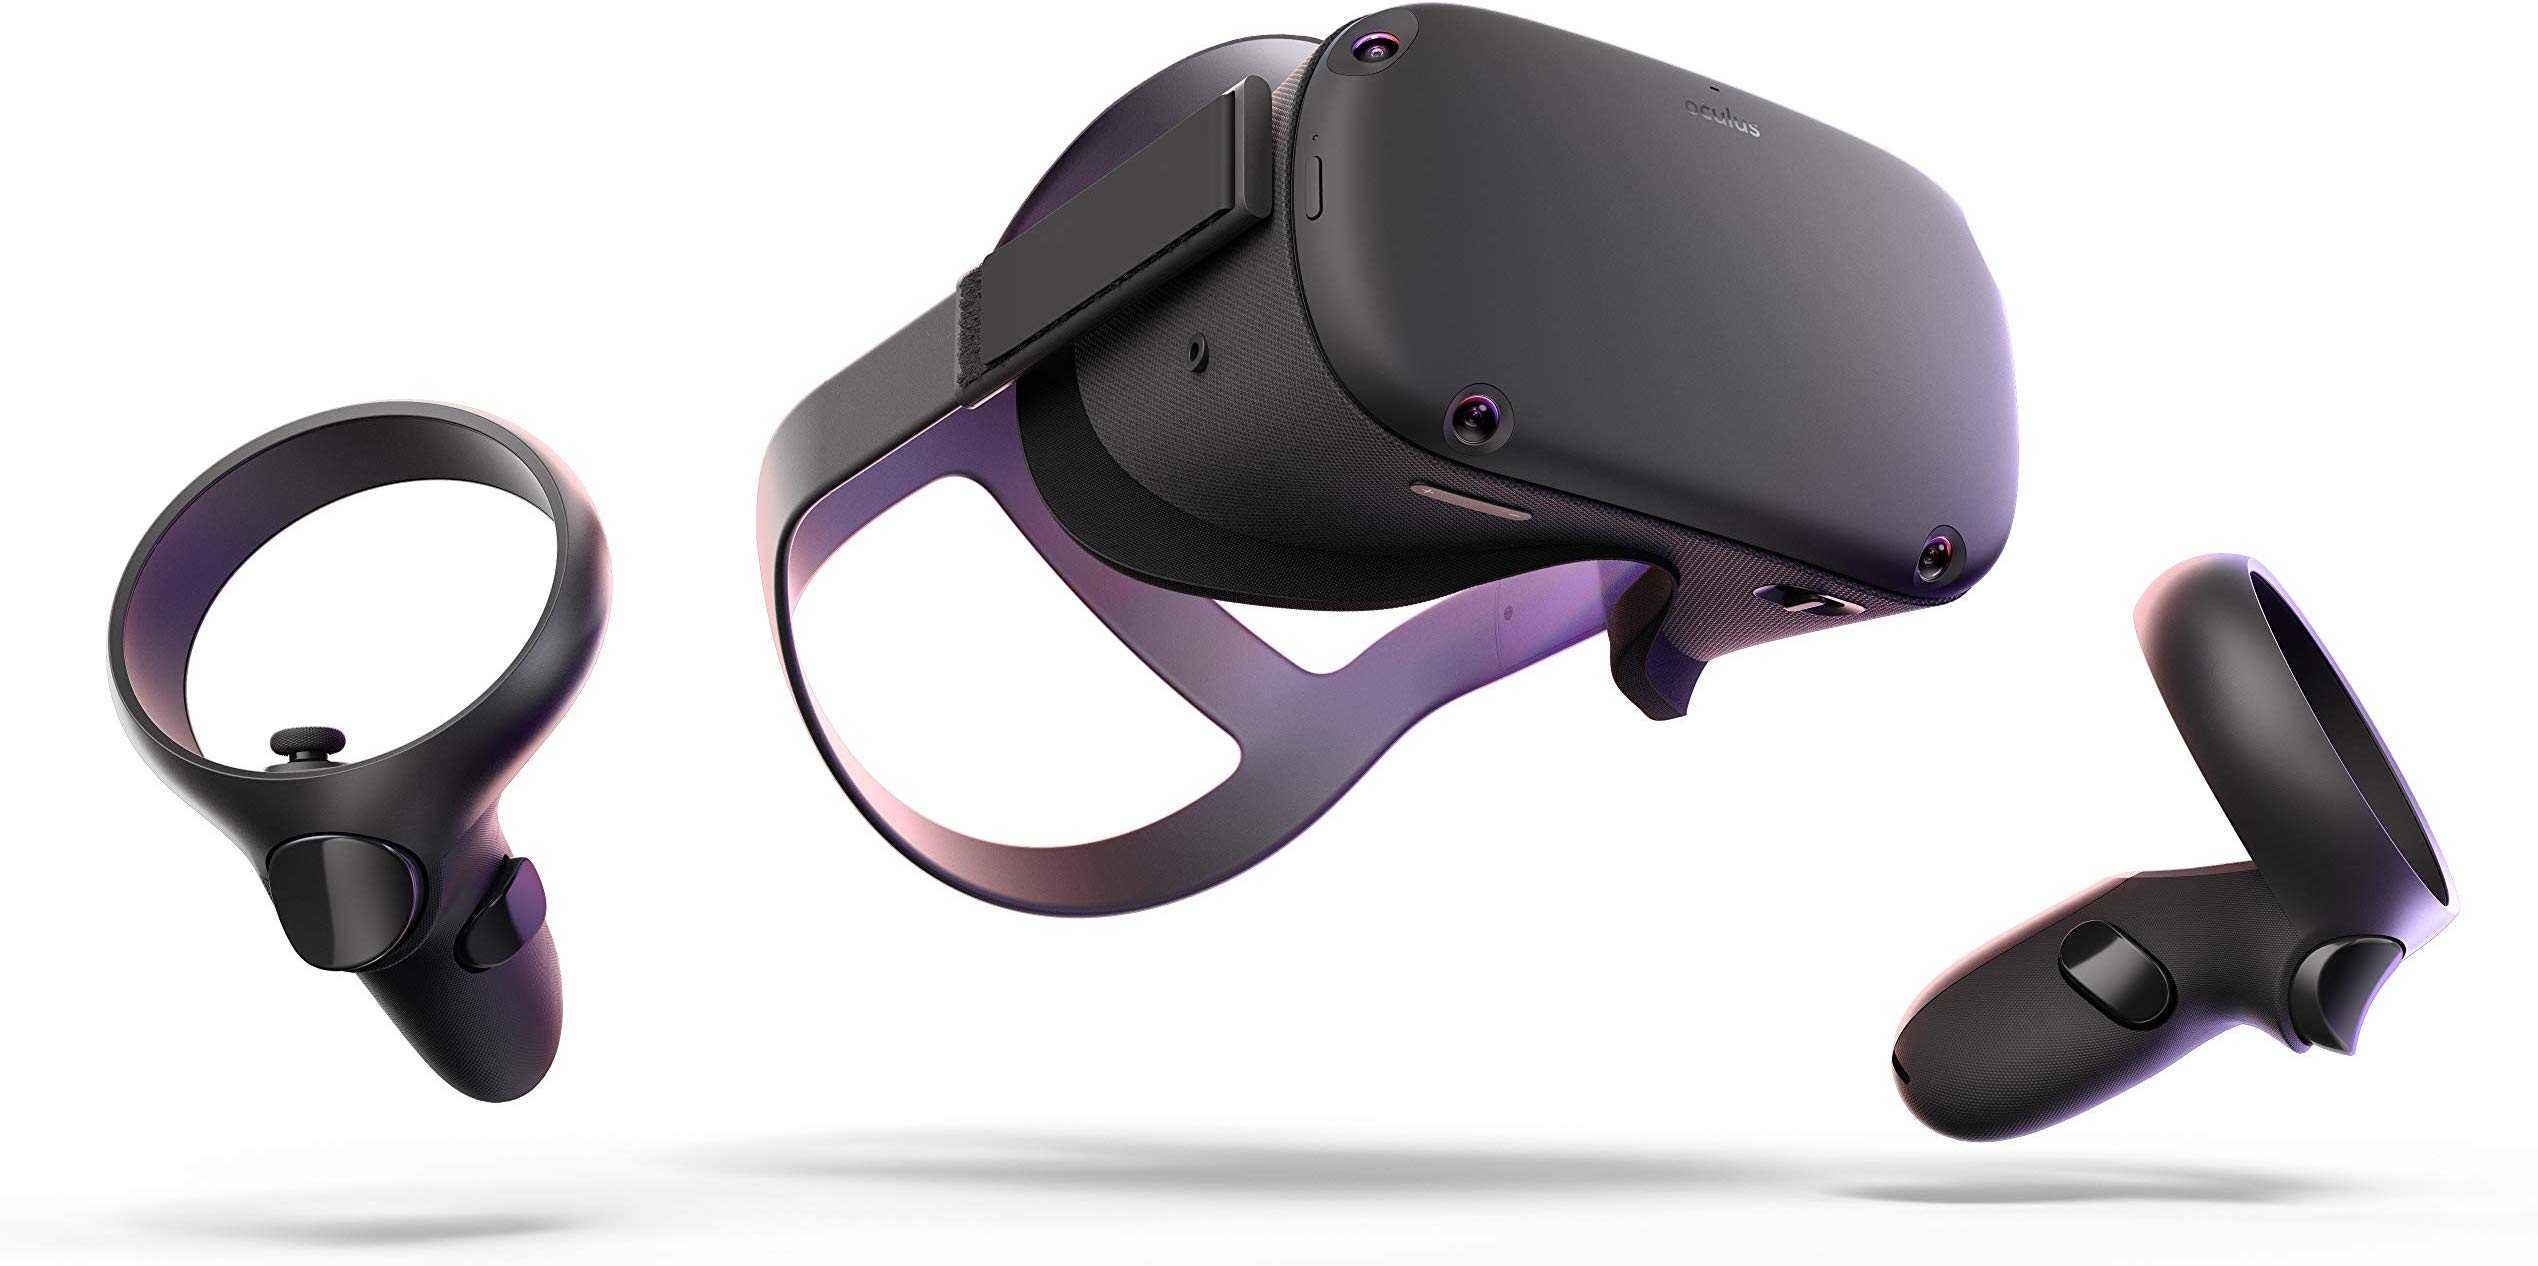 Oculus Quest Virtual Reality Headset and controllers floating against white background